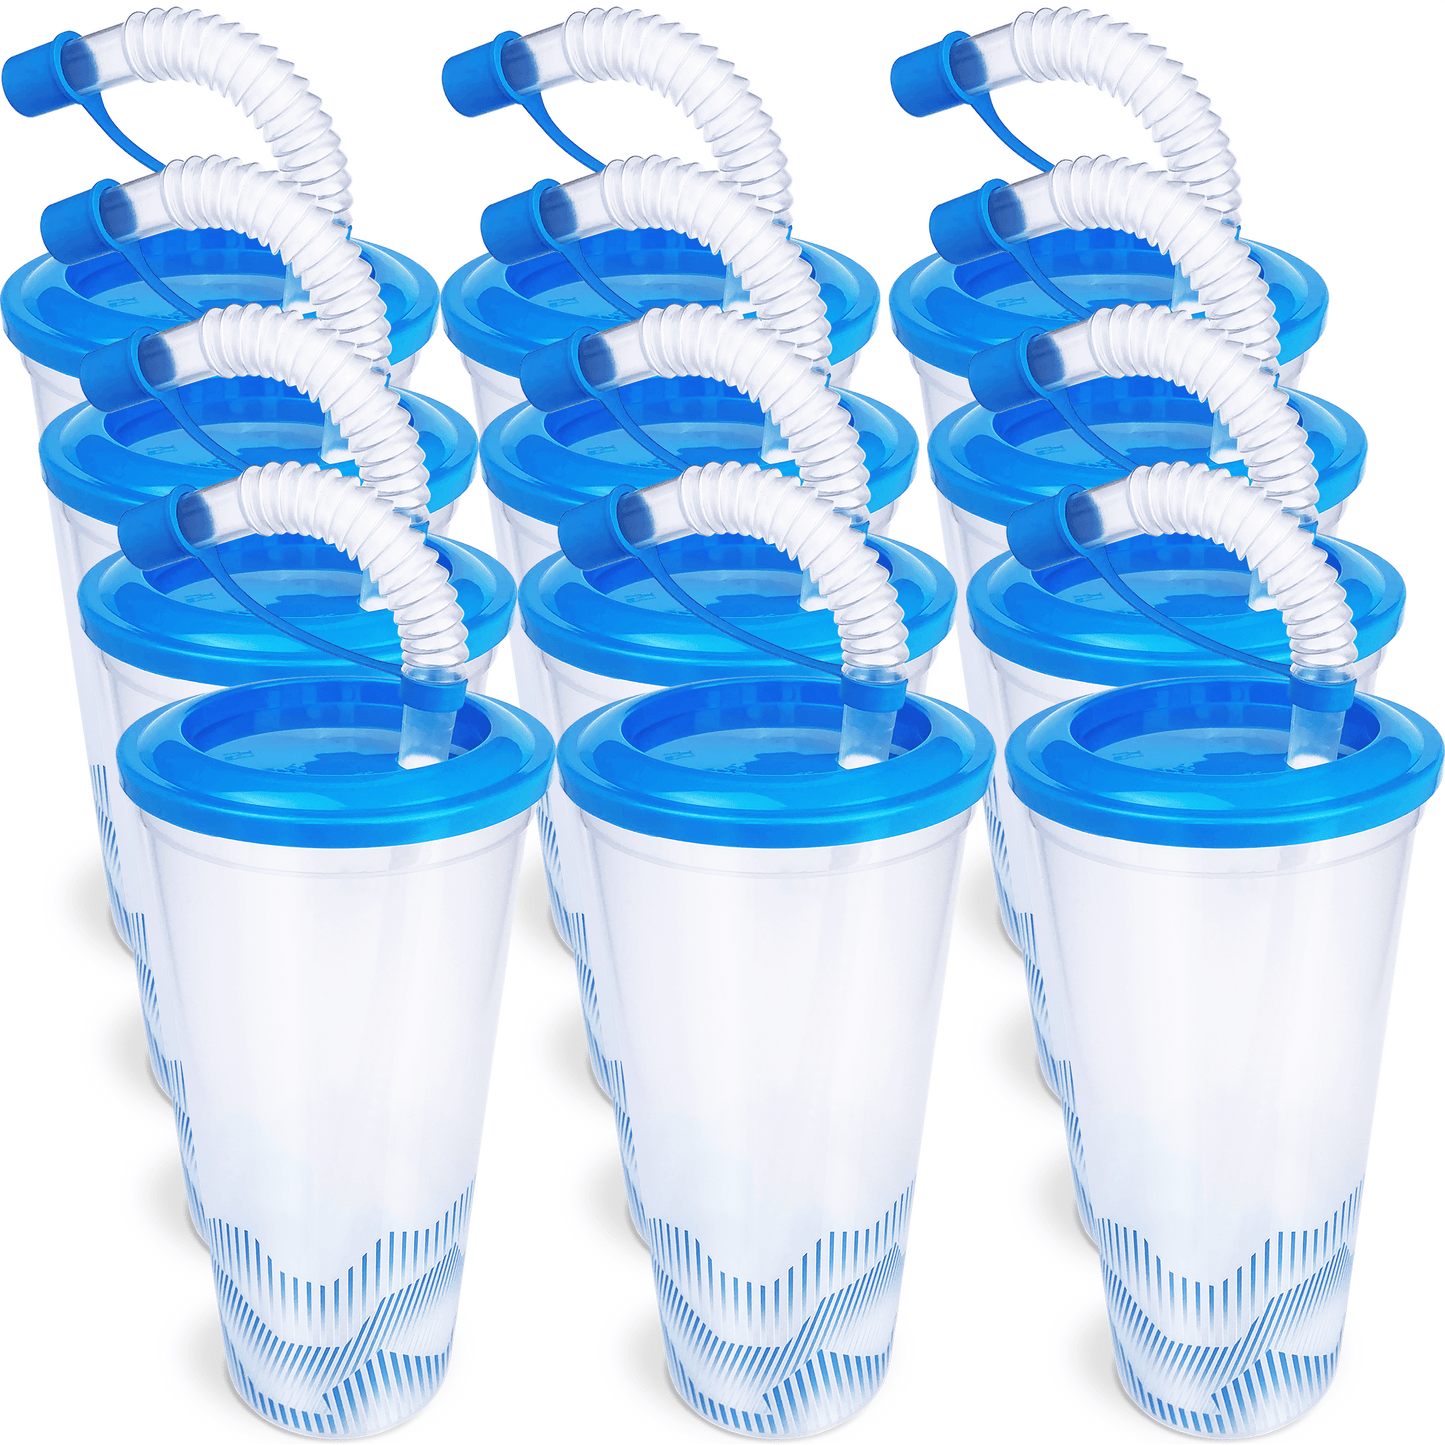 Sweet World USA Tumbler Cups Blue Tumbler Cups Party Pack (100 cups) - (17oz./500ml.) cups with lids and straws